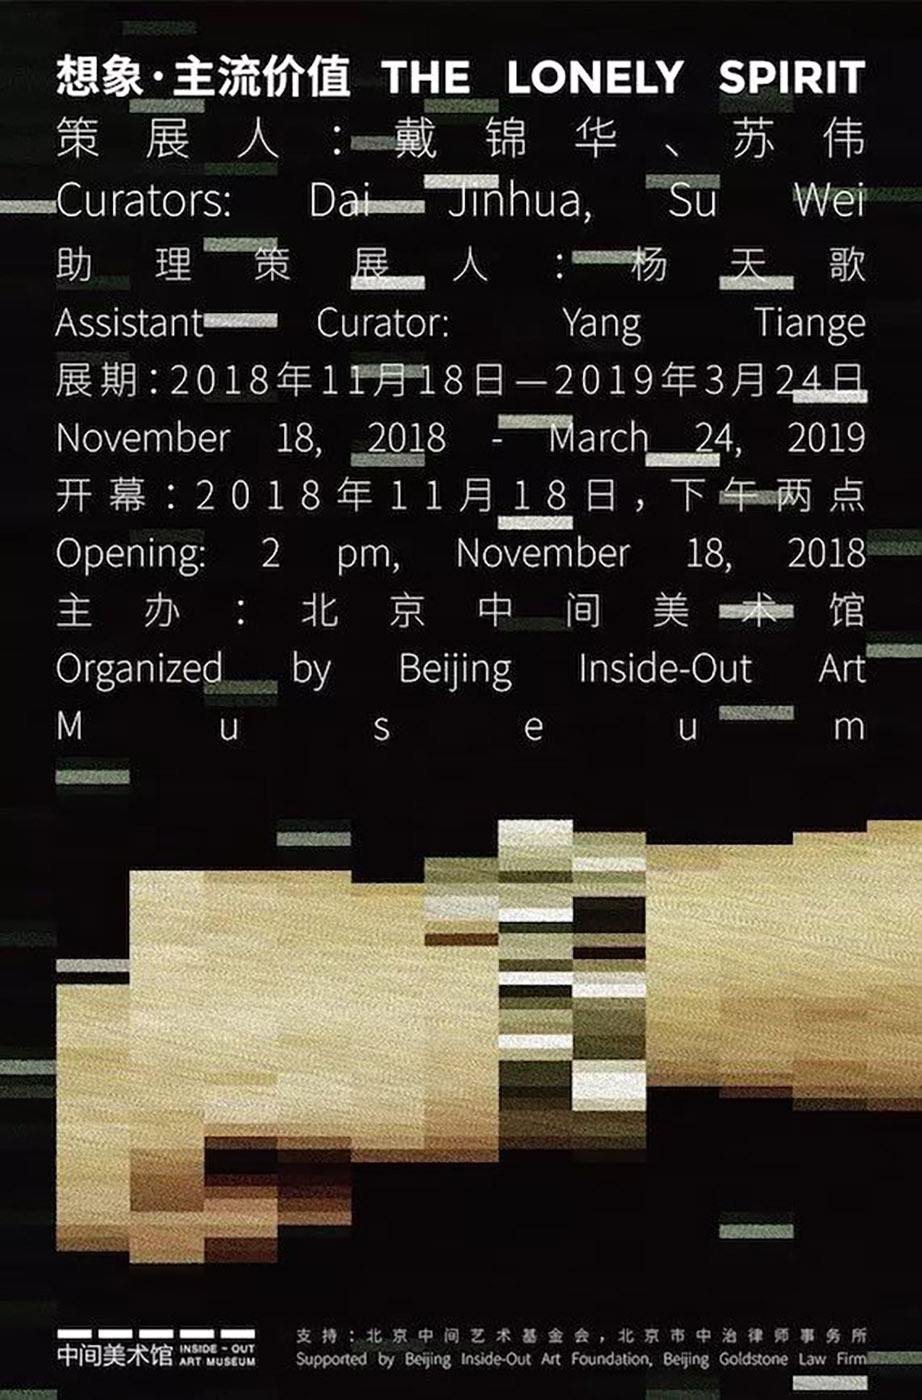 Hao Jingban participates in “The Lonely Spirit” at Beijing Inside-out Art Museum